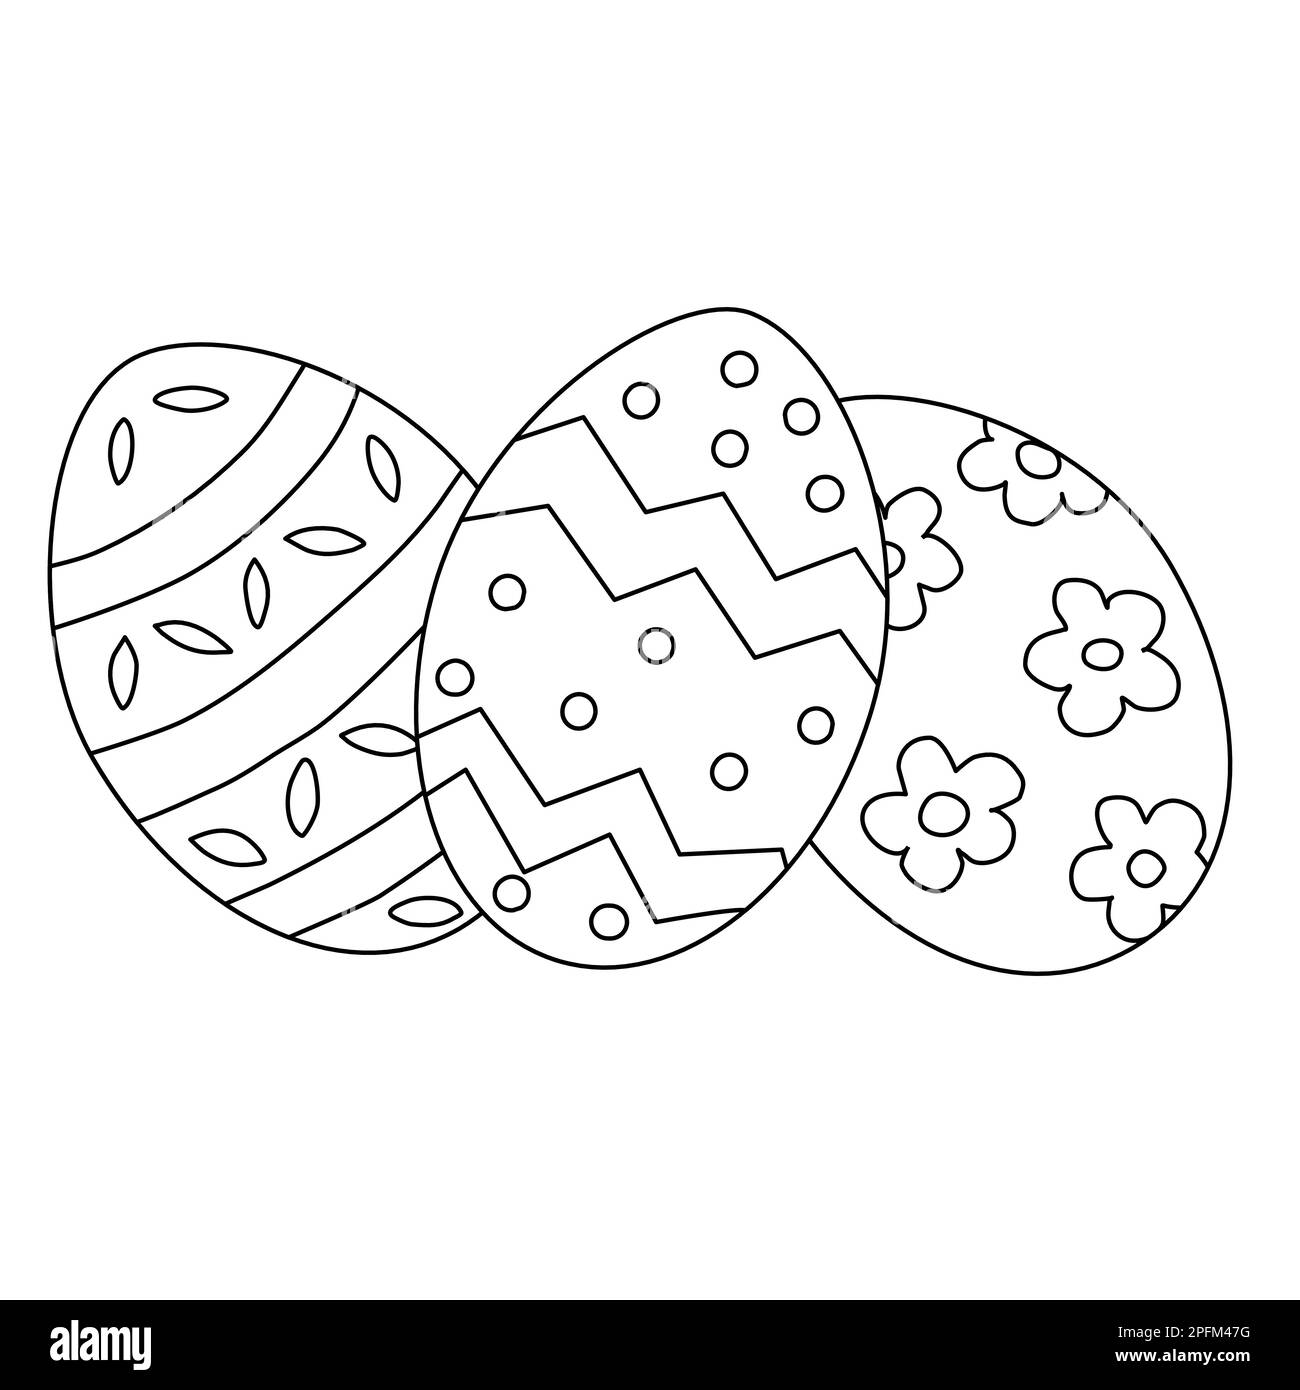 Flat icon easter ornate eggs black and white stock photos images